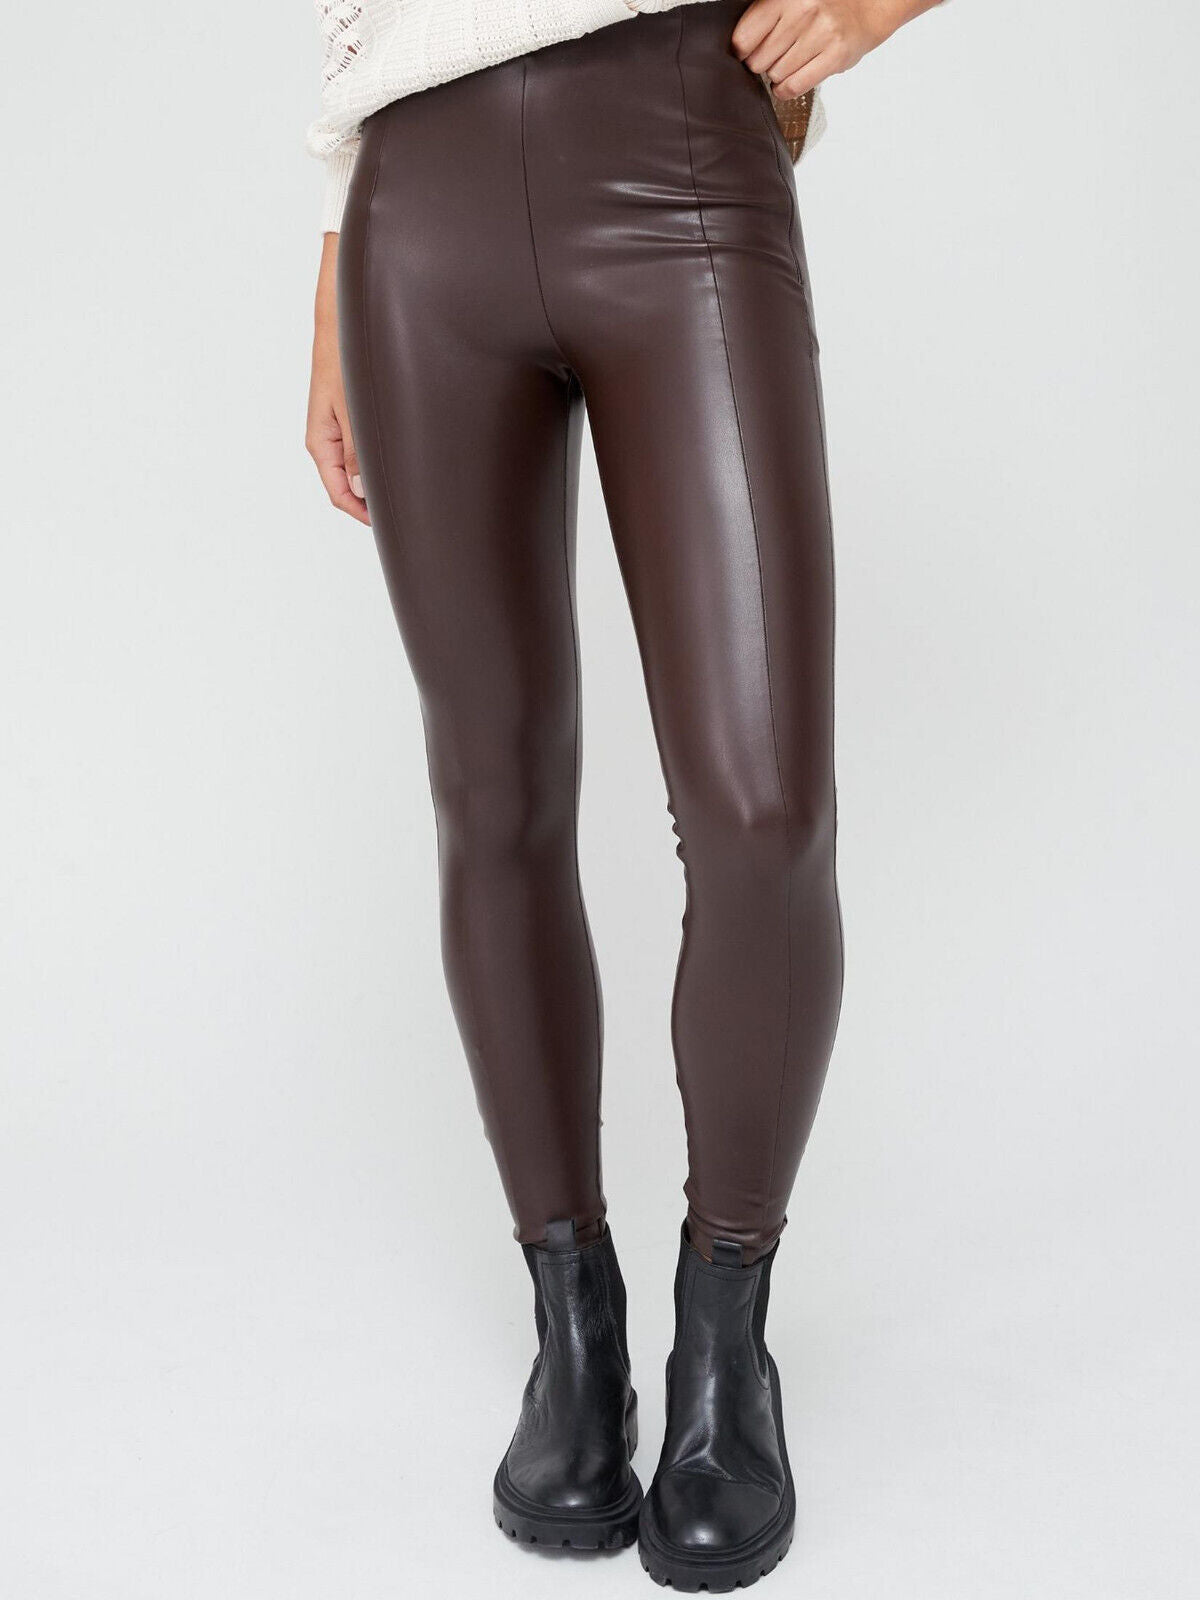 Everyday Faux Leather Legging - Oxblood Size 14.